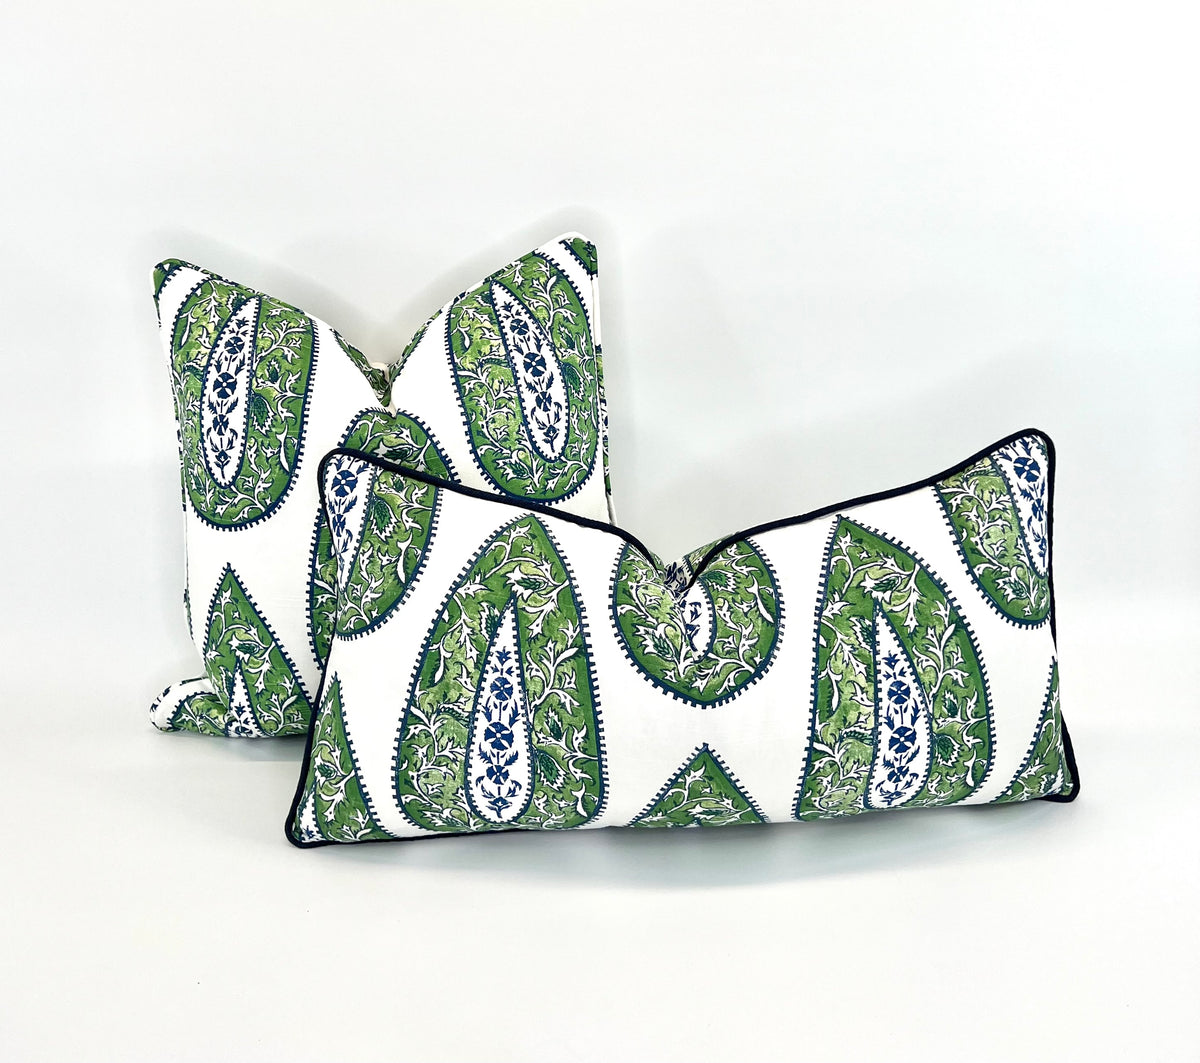 Decorative Pillow Cover in Bindi Kelly Paisley